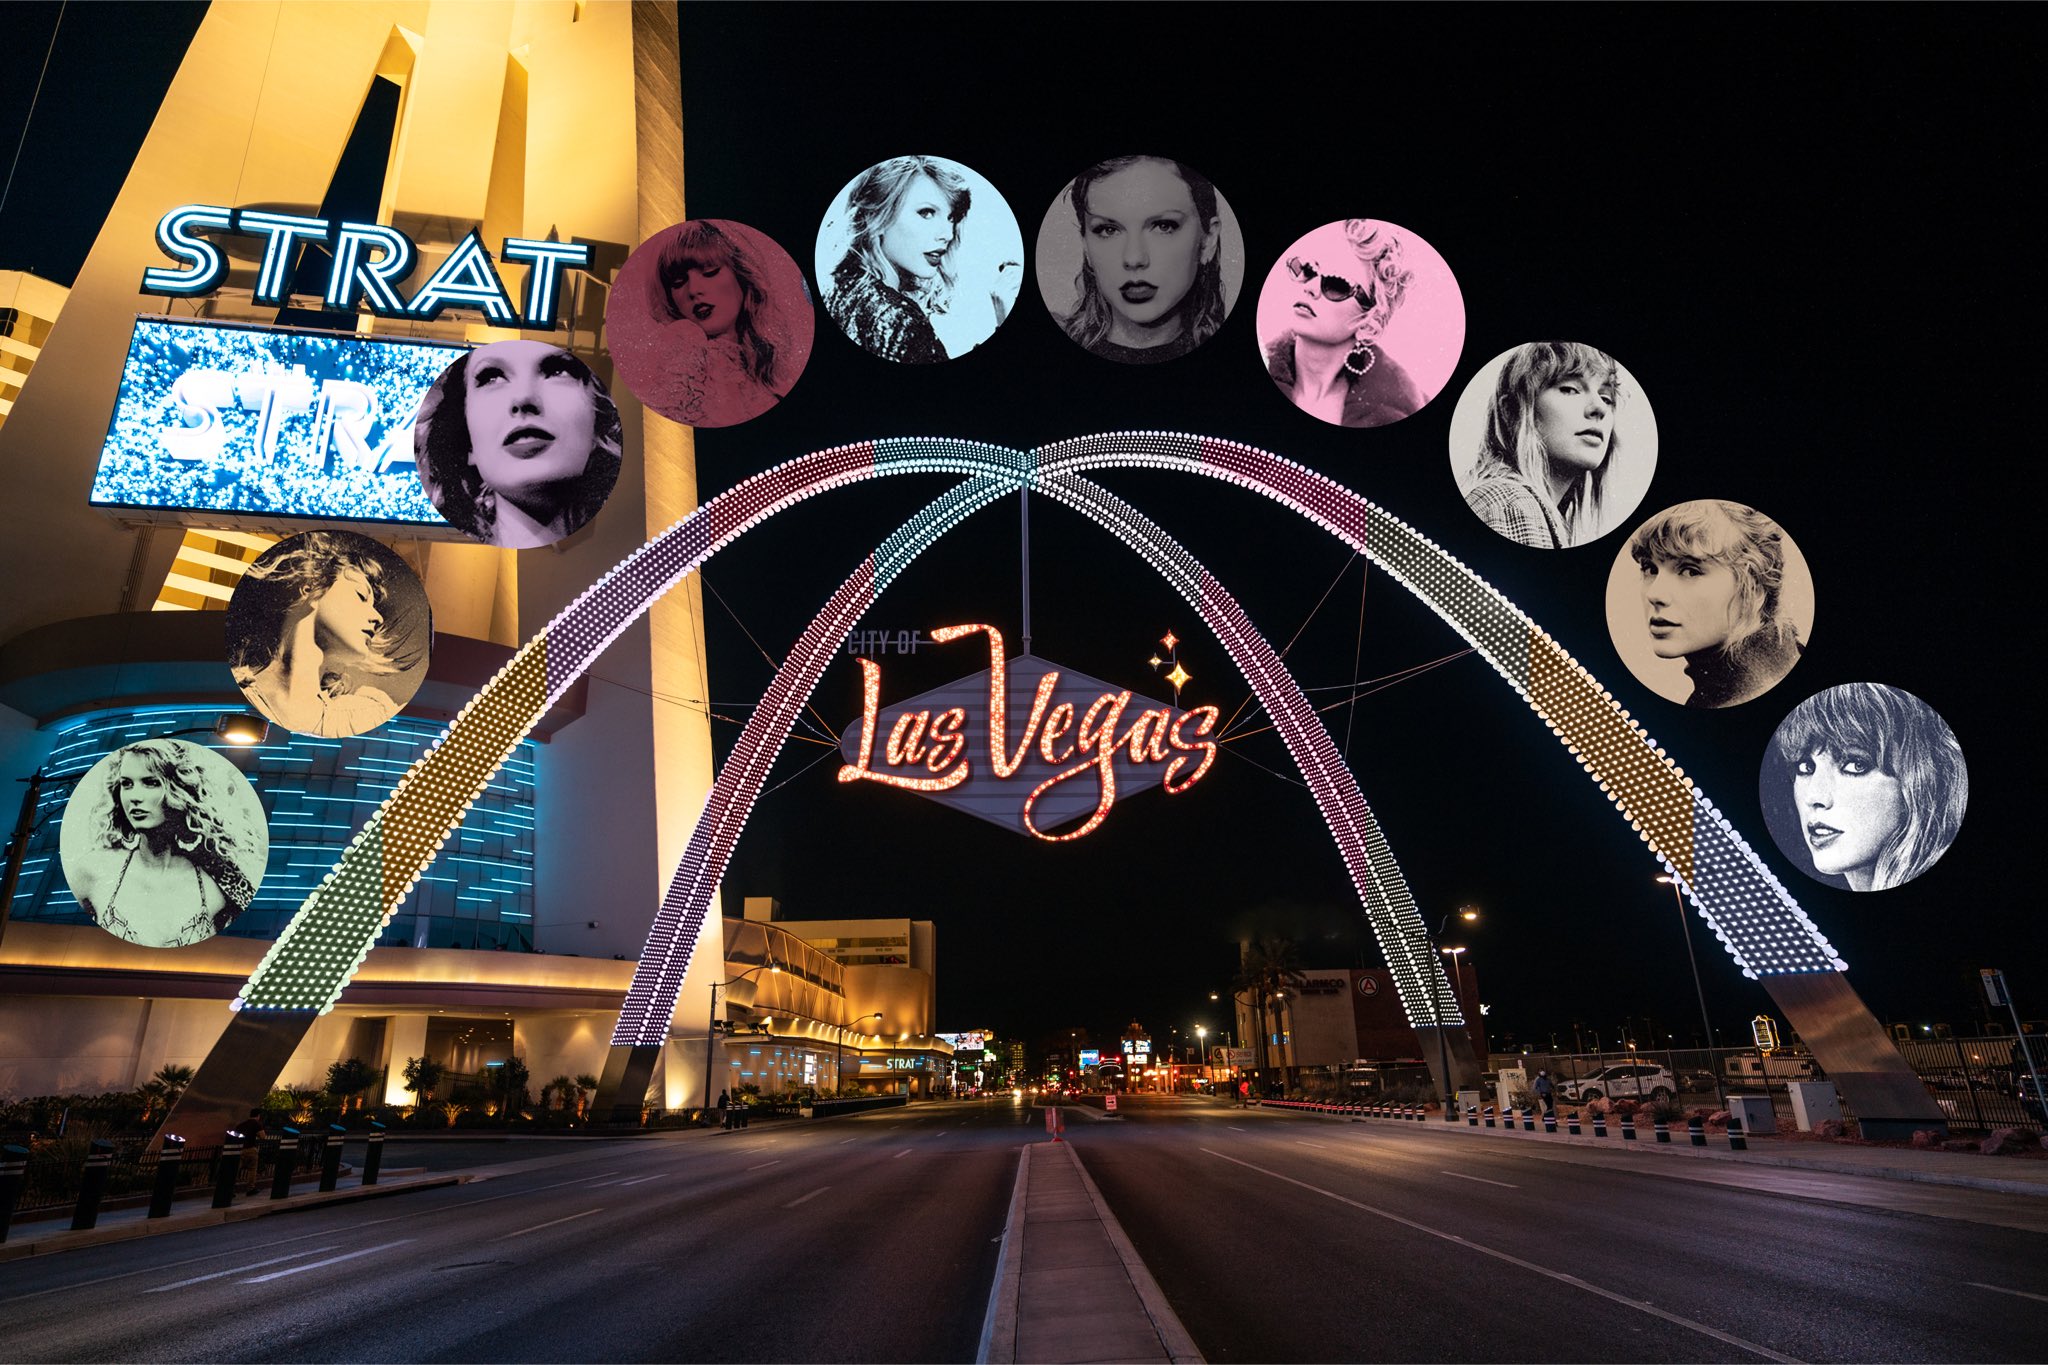 City of Las Vegas on X: Don't forget that the Gateway Arches have a  special light display today & tomorrow in honor of all the  @taylorswift13 eras & @TSTheErasTour ✨ Each era